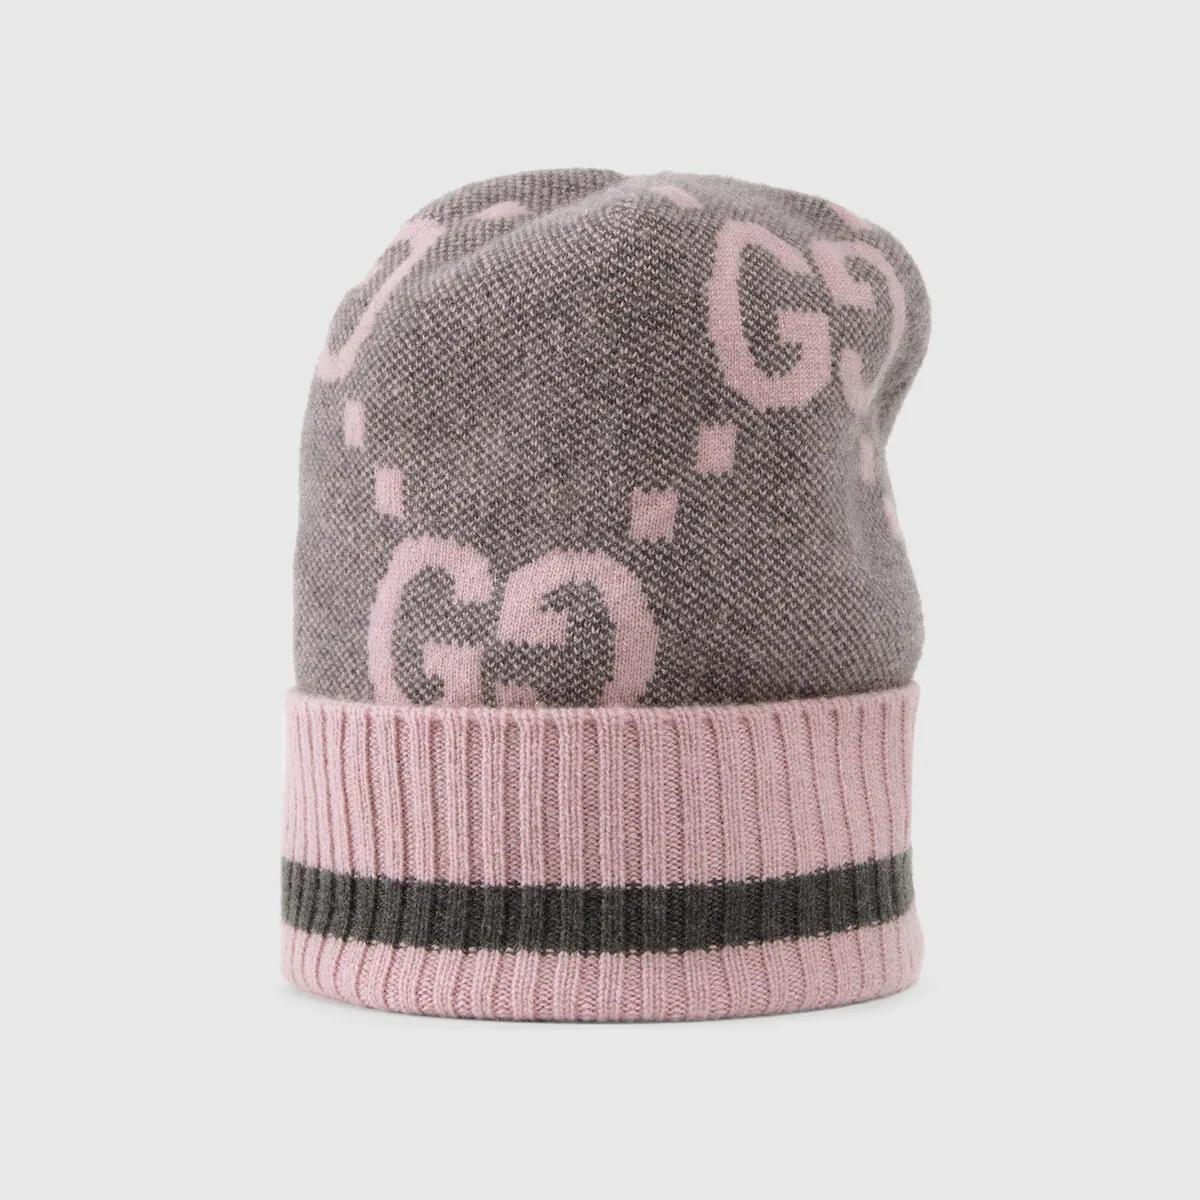 GG knit cashmere hat - 2